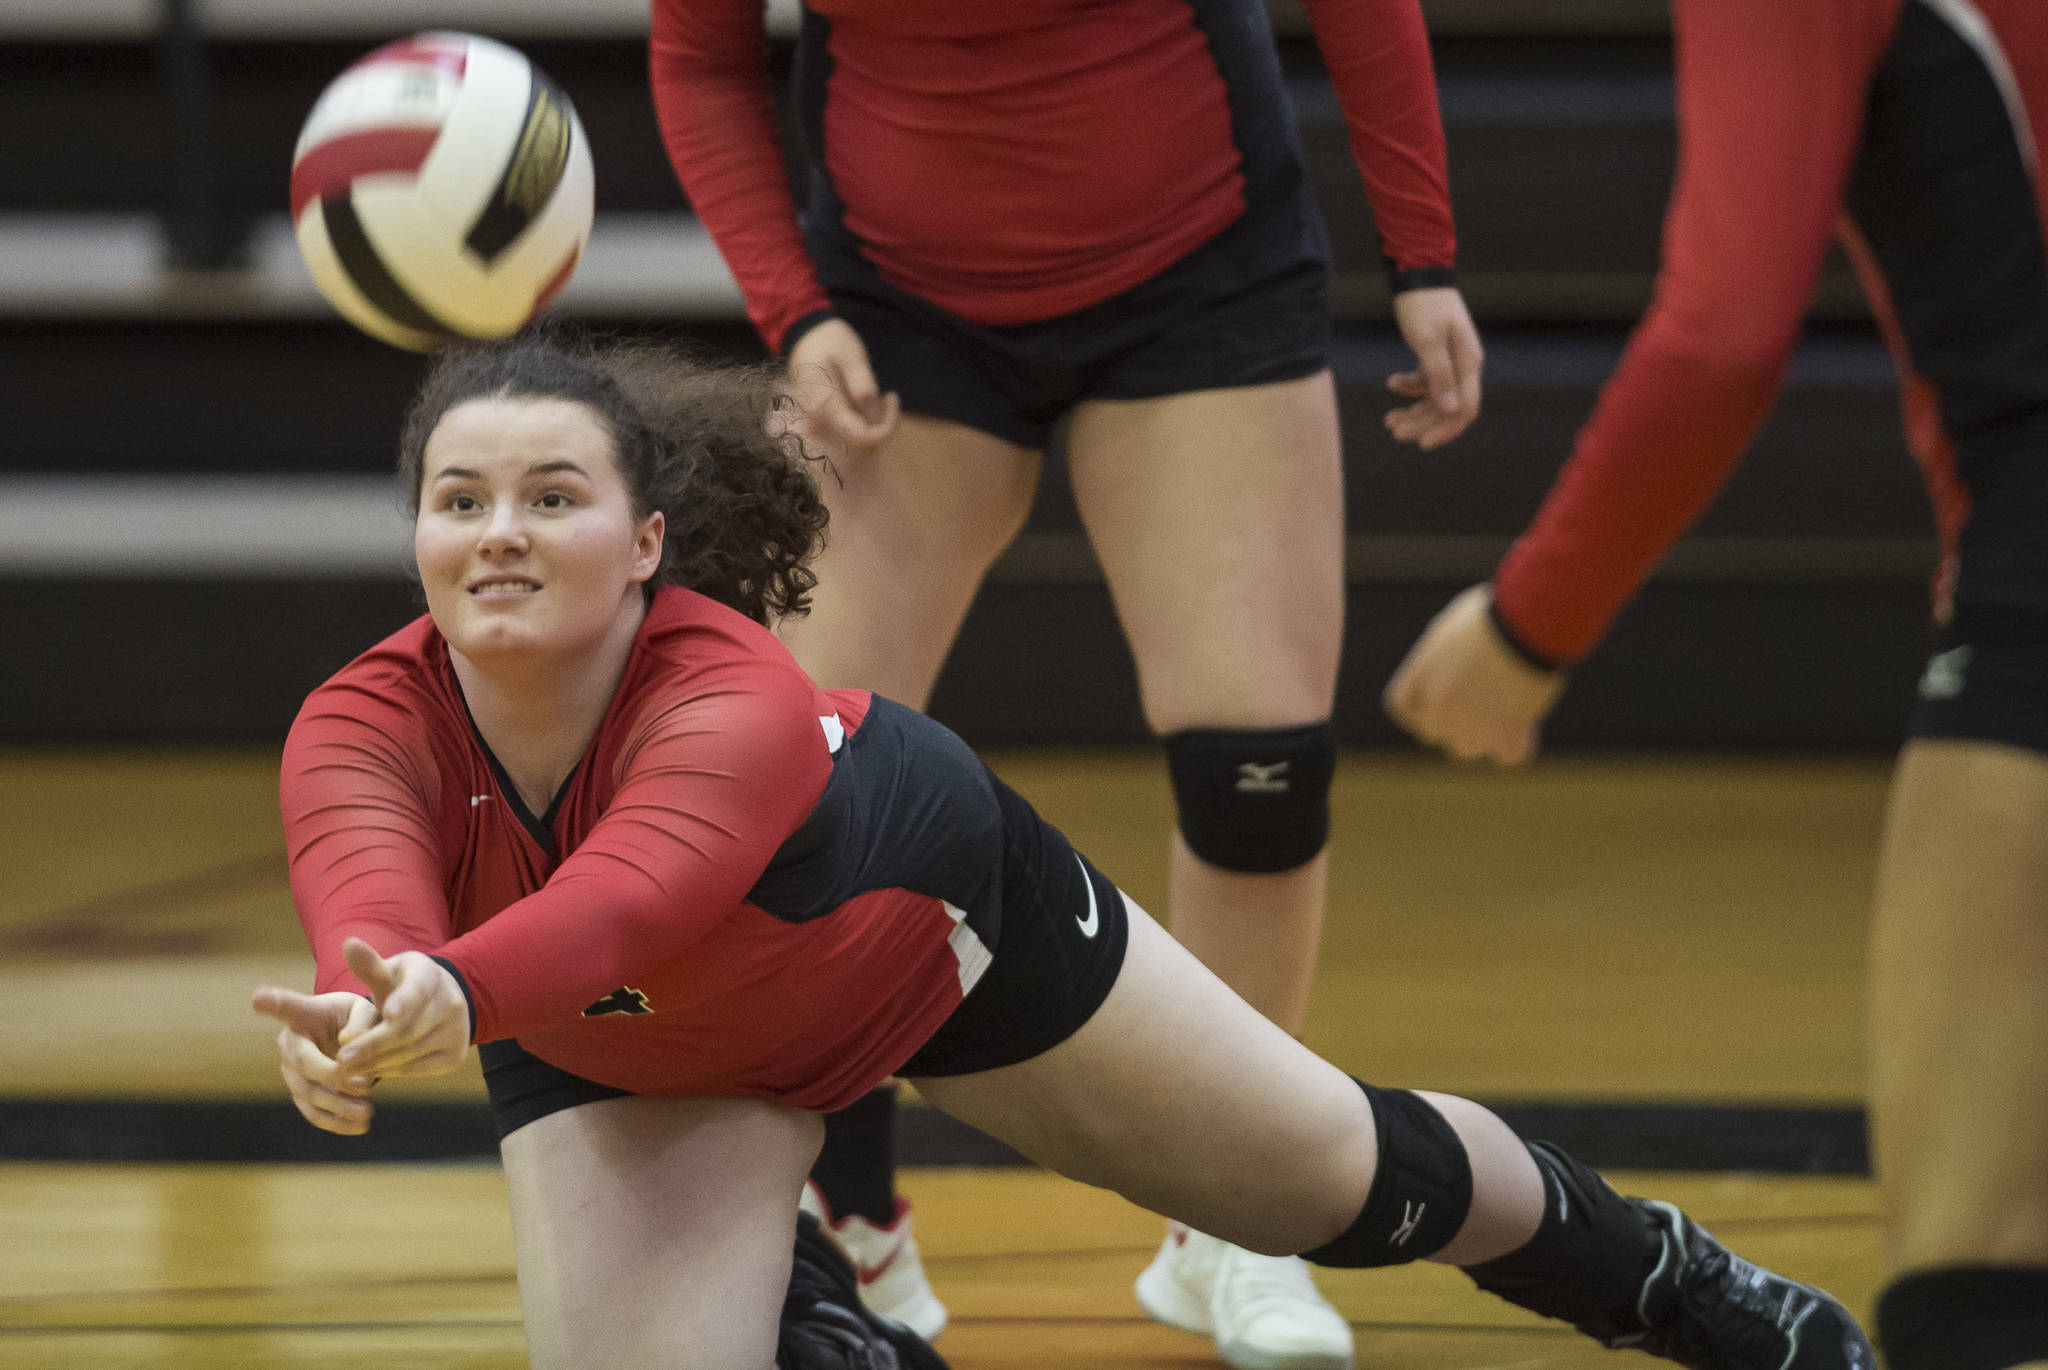 Gabi Griggs dives for the ball against Ketchikan during the JIVE Tournament at Juneau-Douglas High School on Friday, Oct. 12, 2018. (Michael Penn | Juneau Empire)